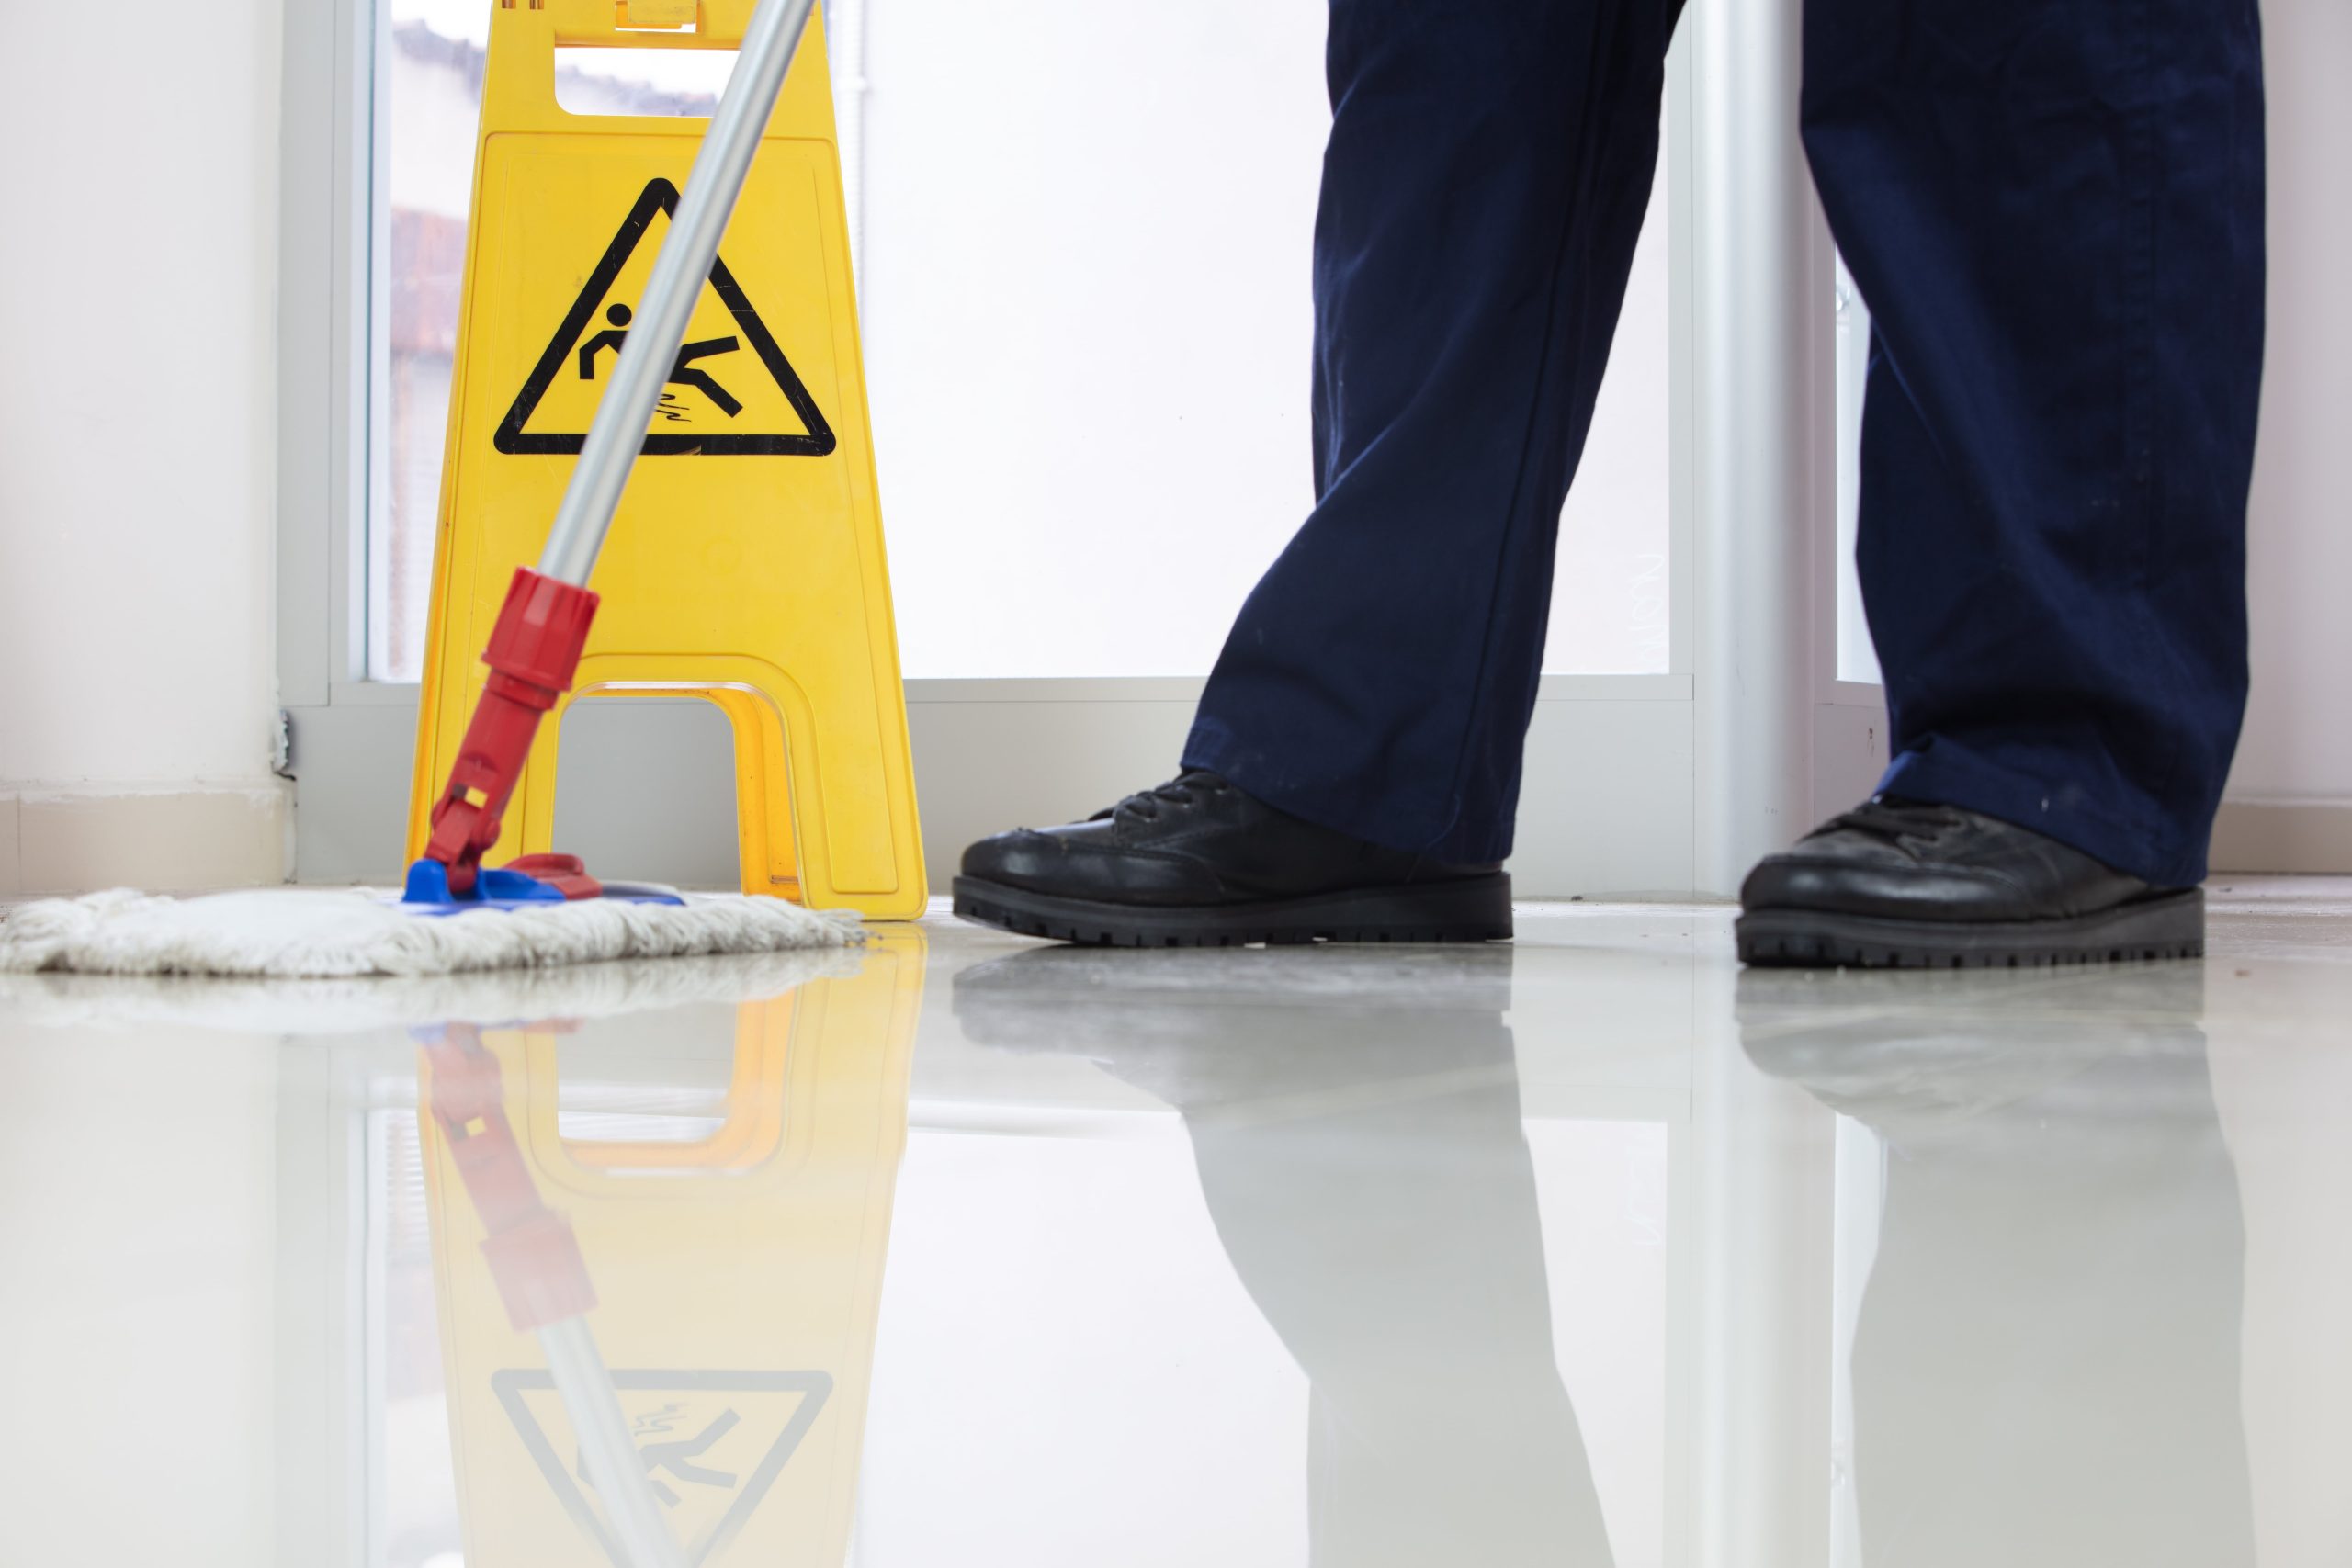 San Diego Daily Janitorial Services - One Source Inc.